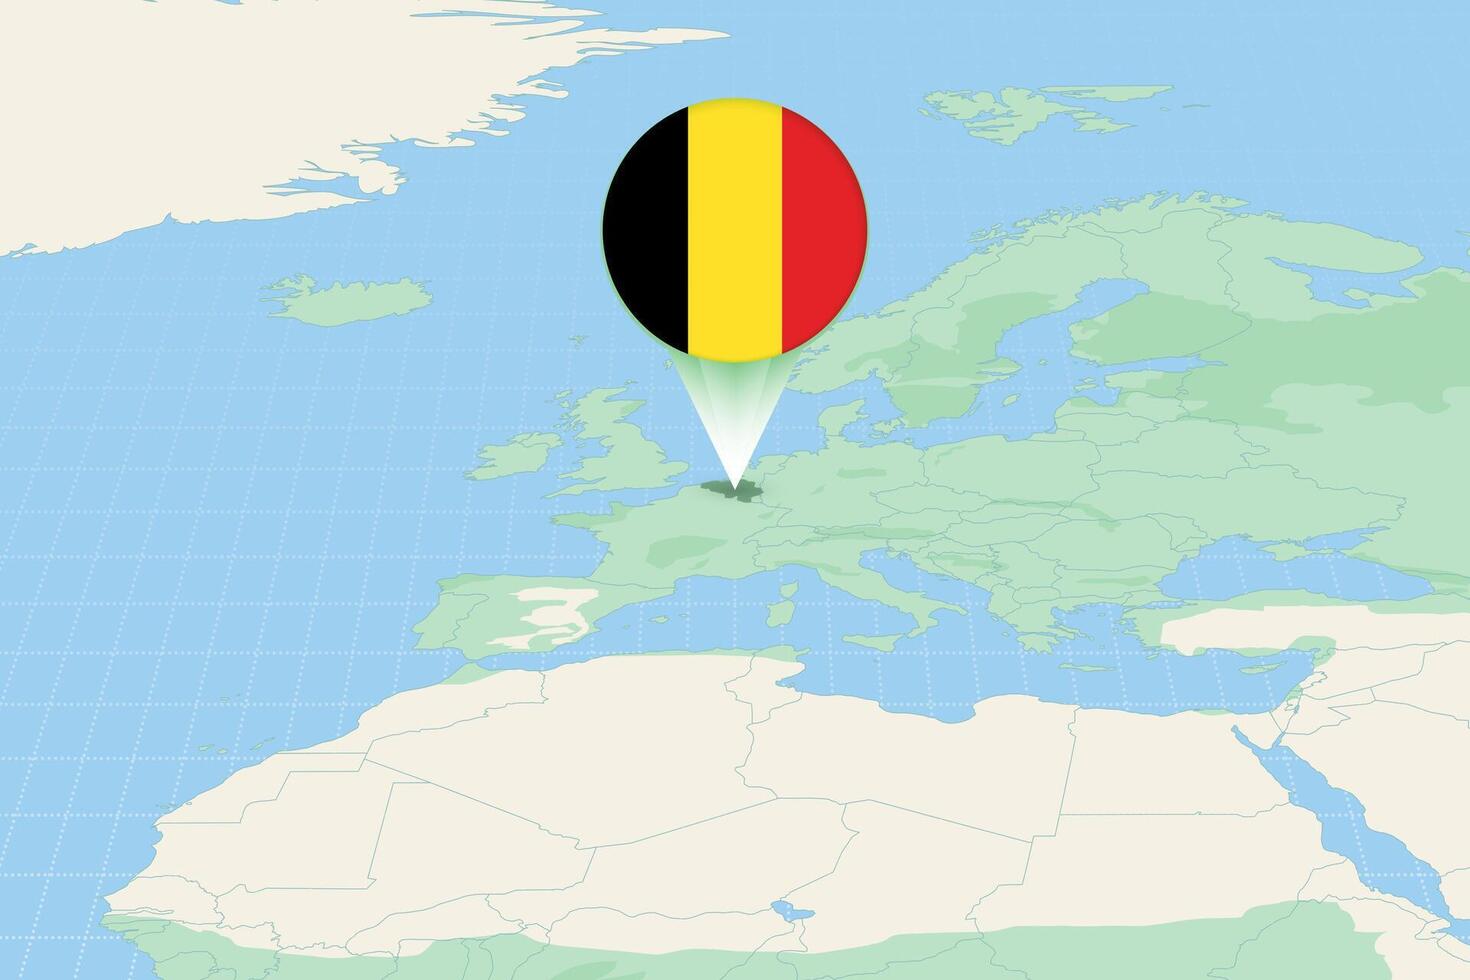 Map illustration of Belgium with the flag. Cartographic illustration of Belgium and neighboring countries. vector